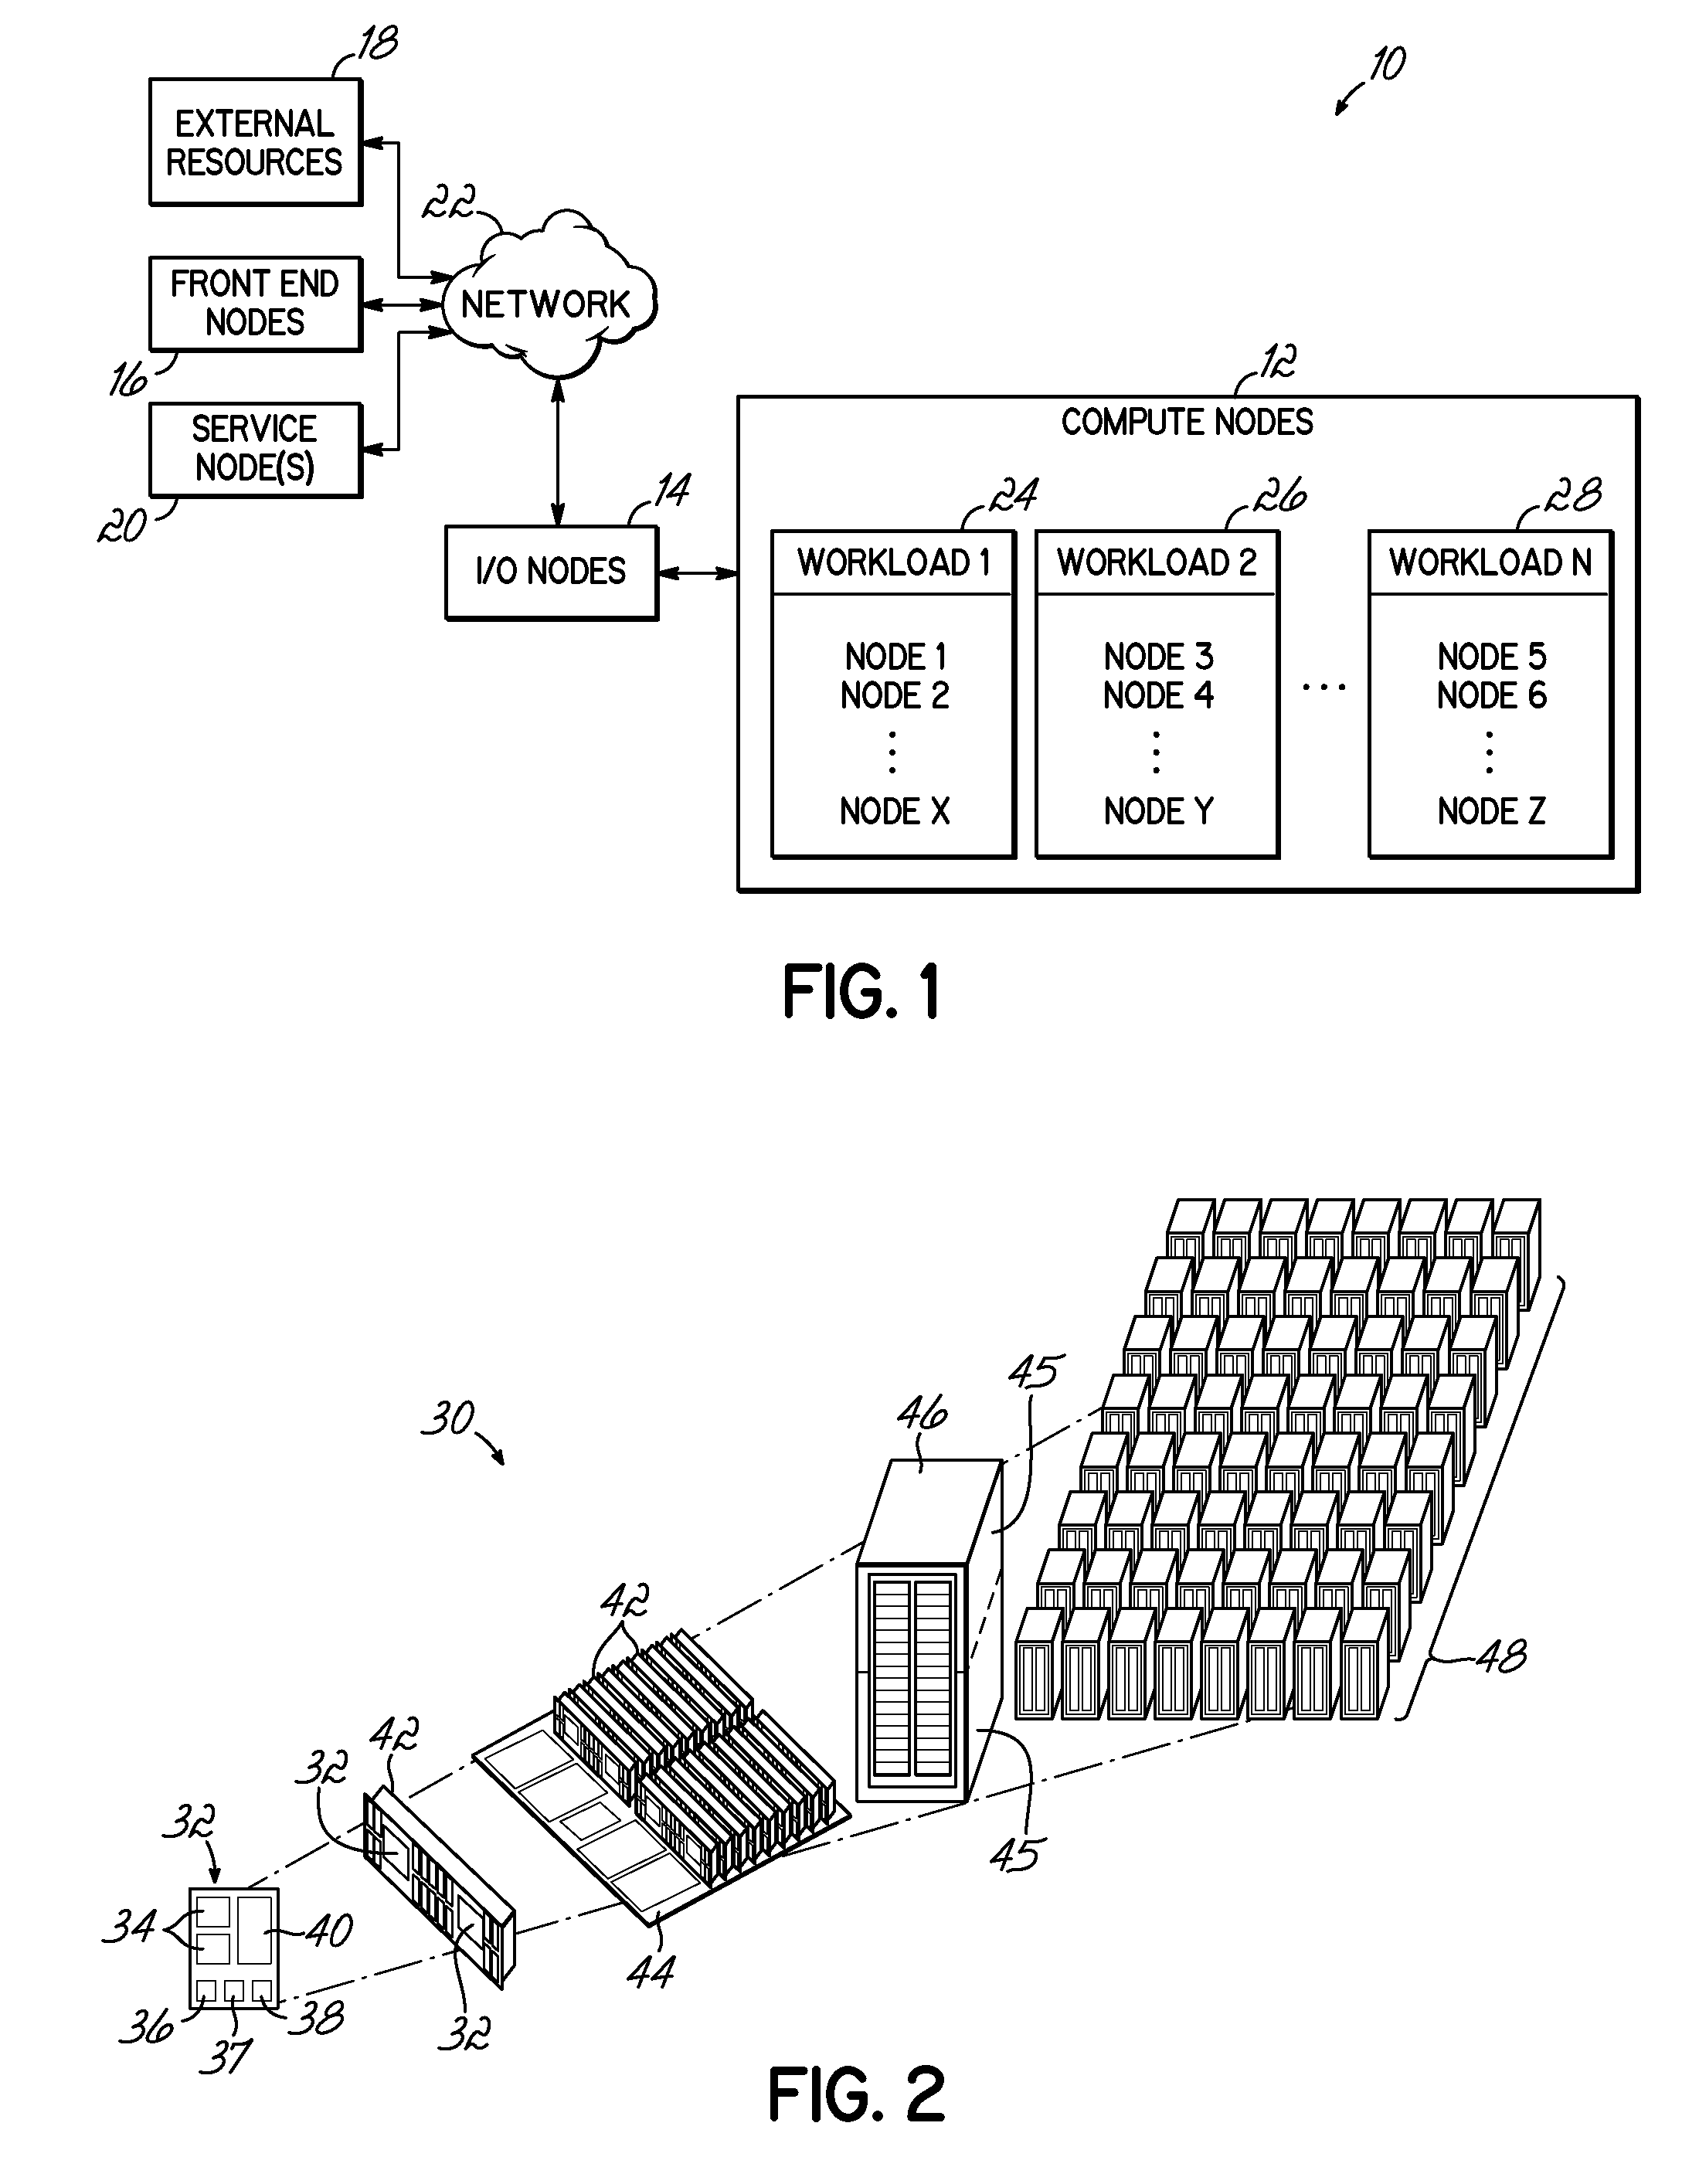 Power adjustment based on completion times in a parallel computing system